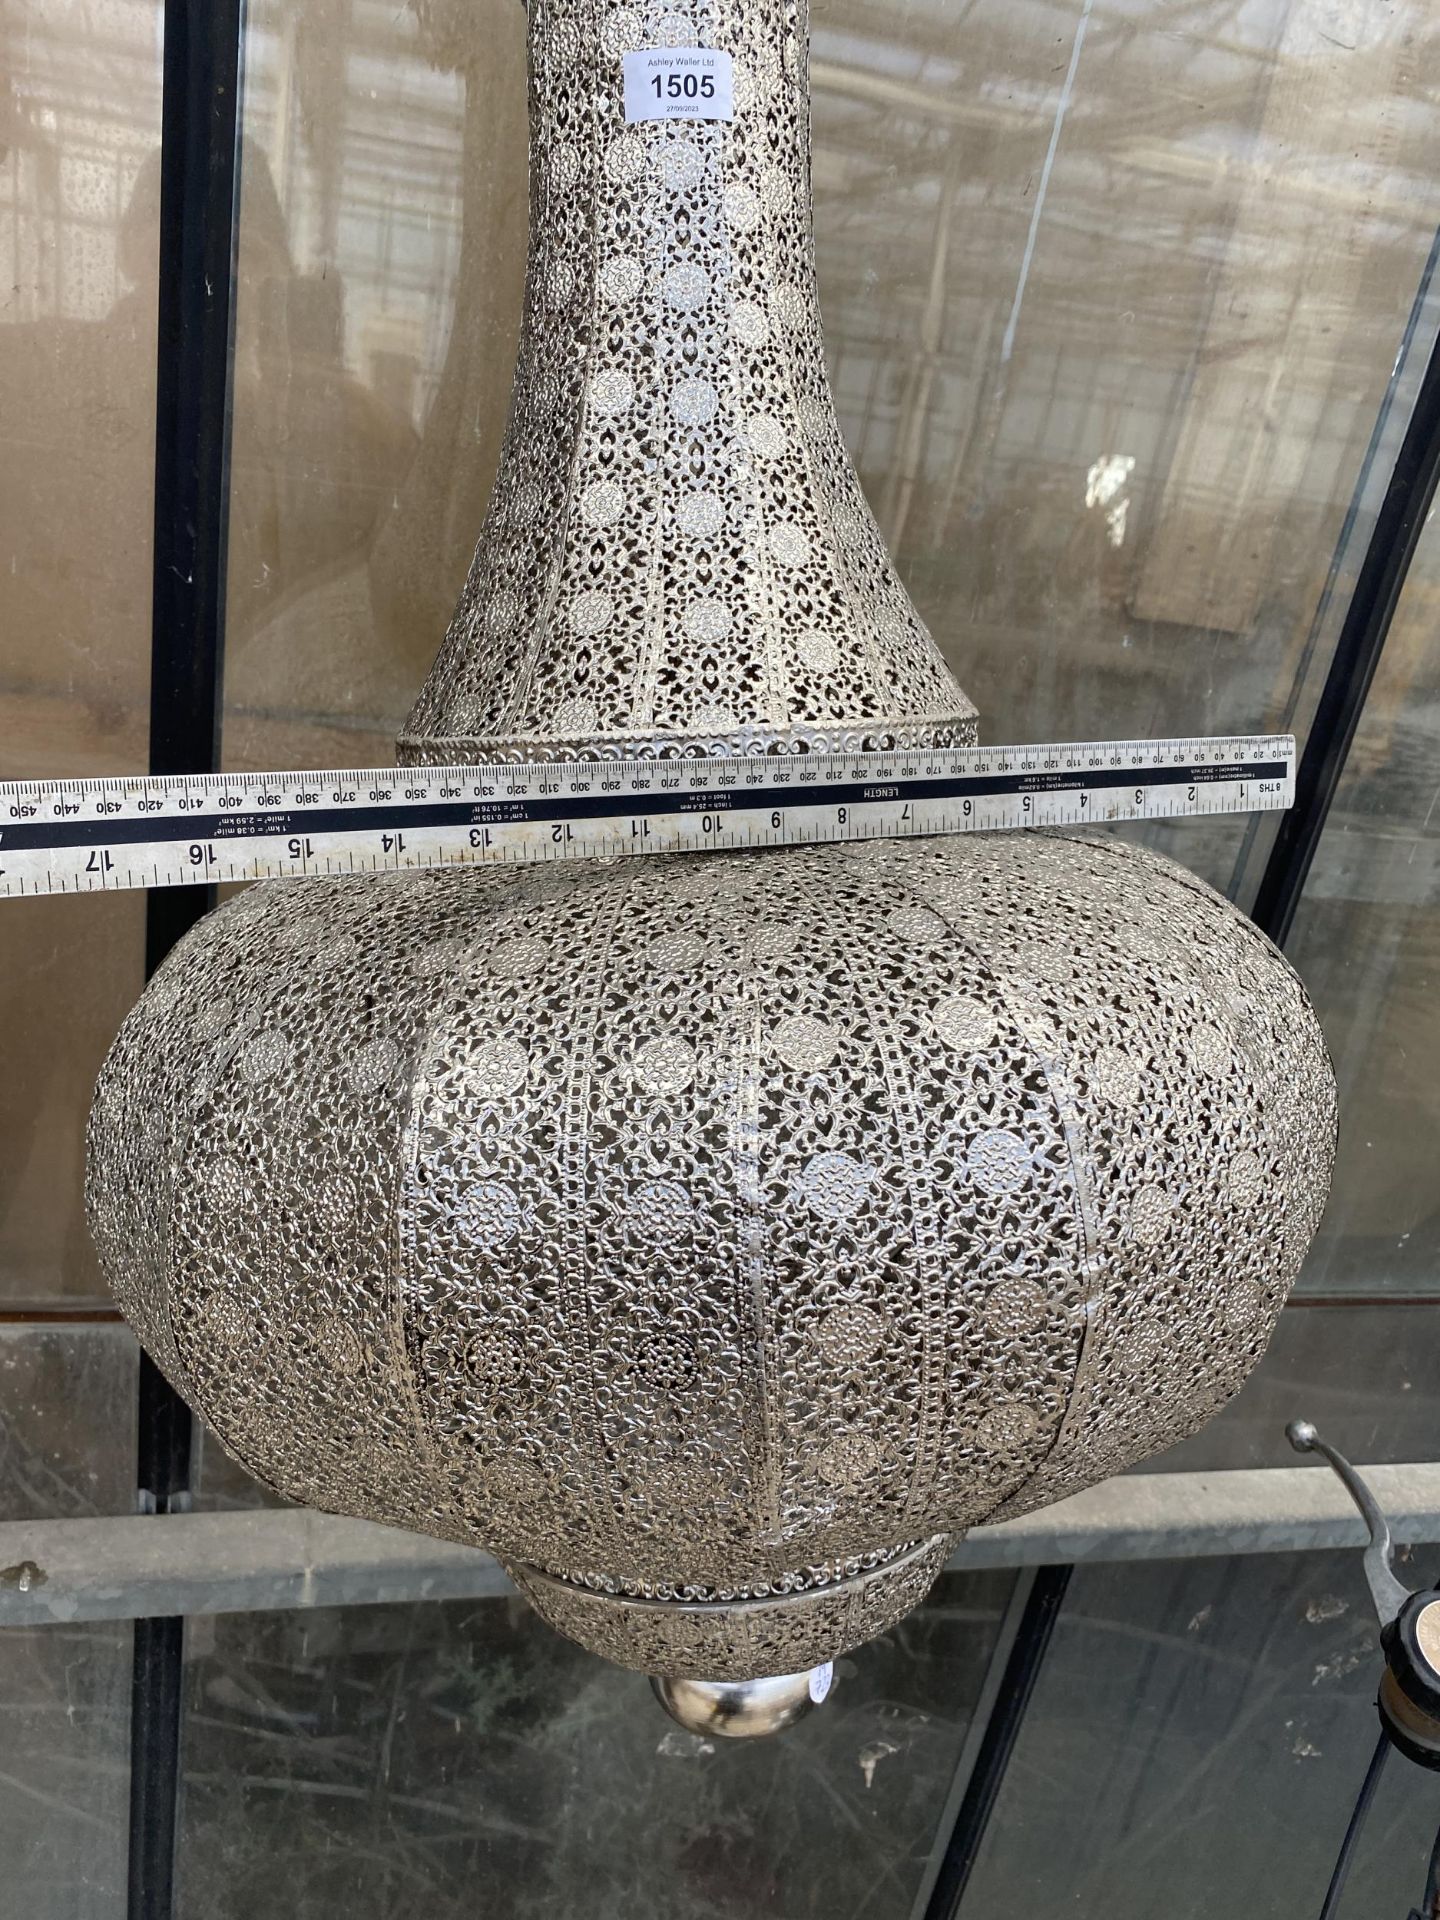 A DECORATIVE METAL MIDDLE EASTERN STYLE LIGHT FITTING - Image 5 of 5